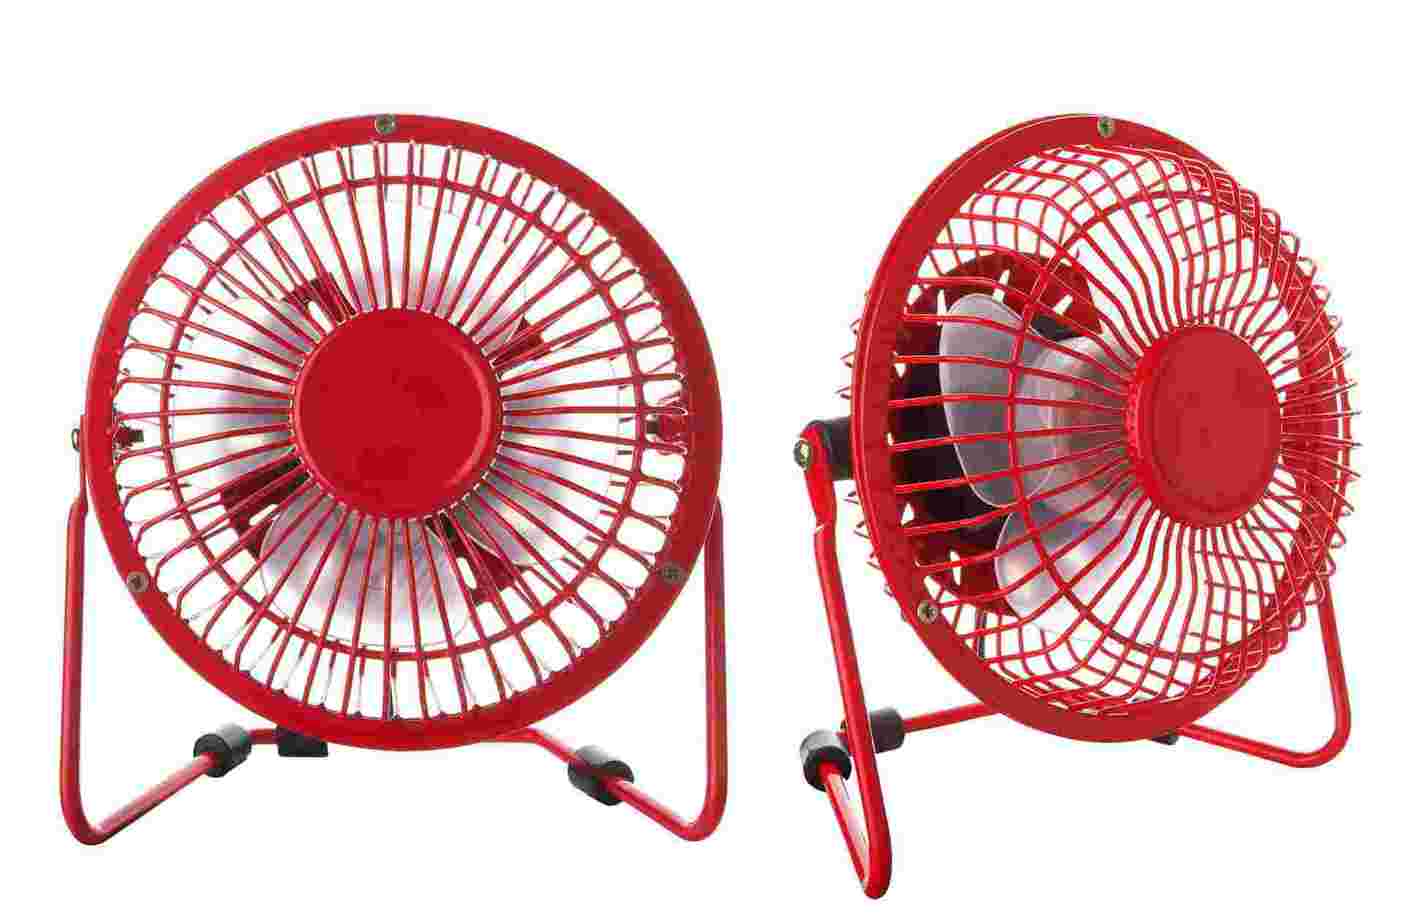 Why Choose A Table Fan?